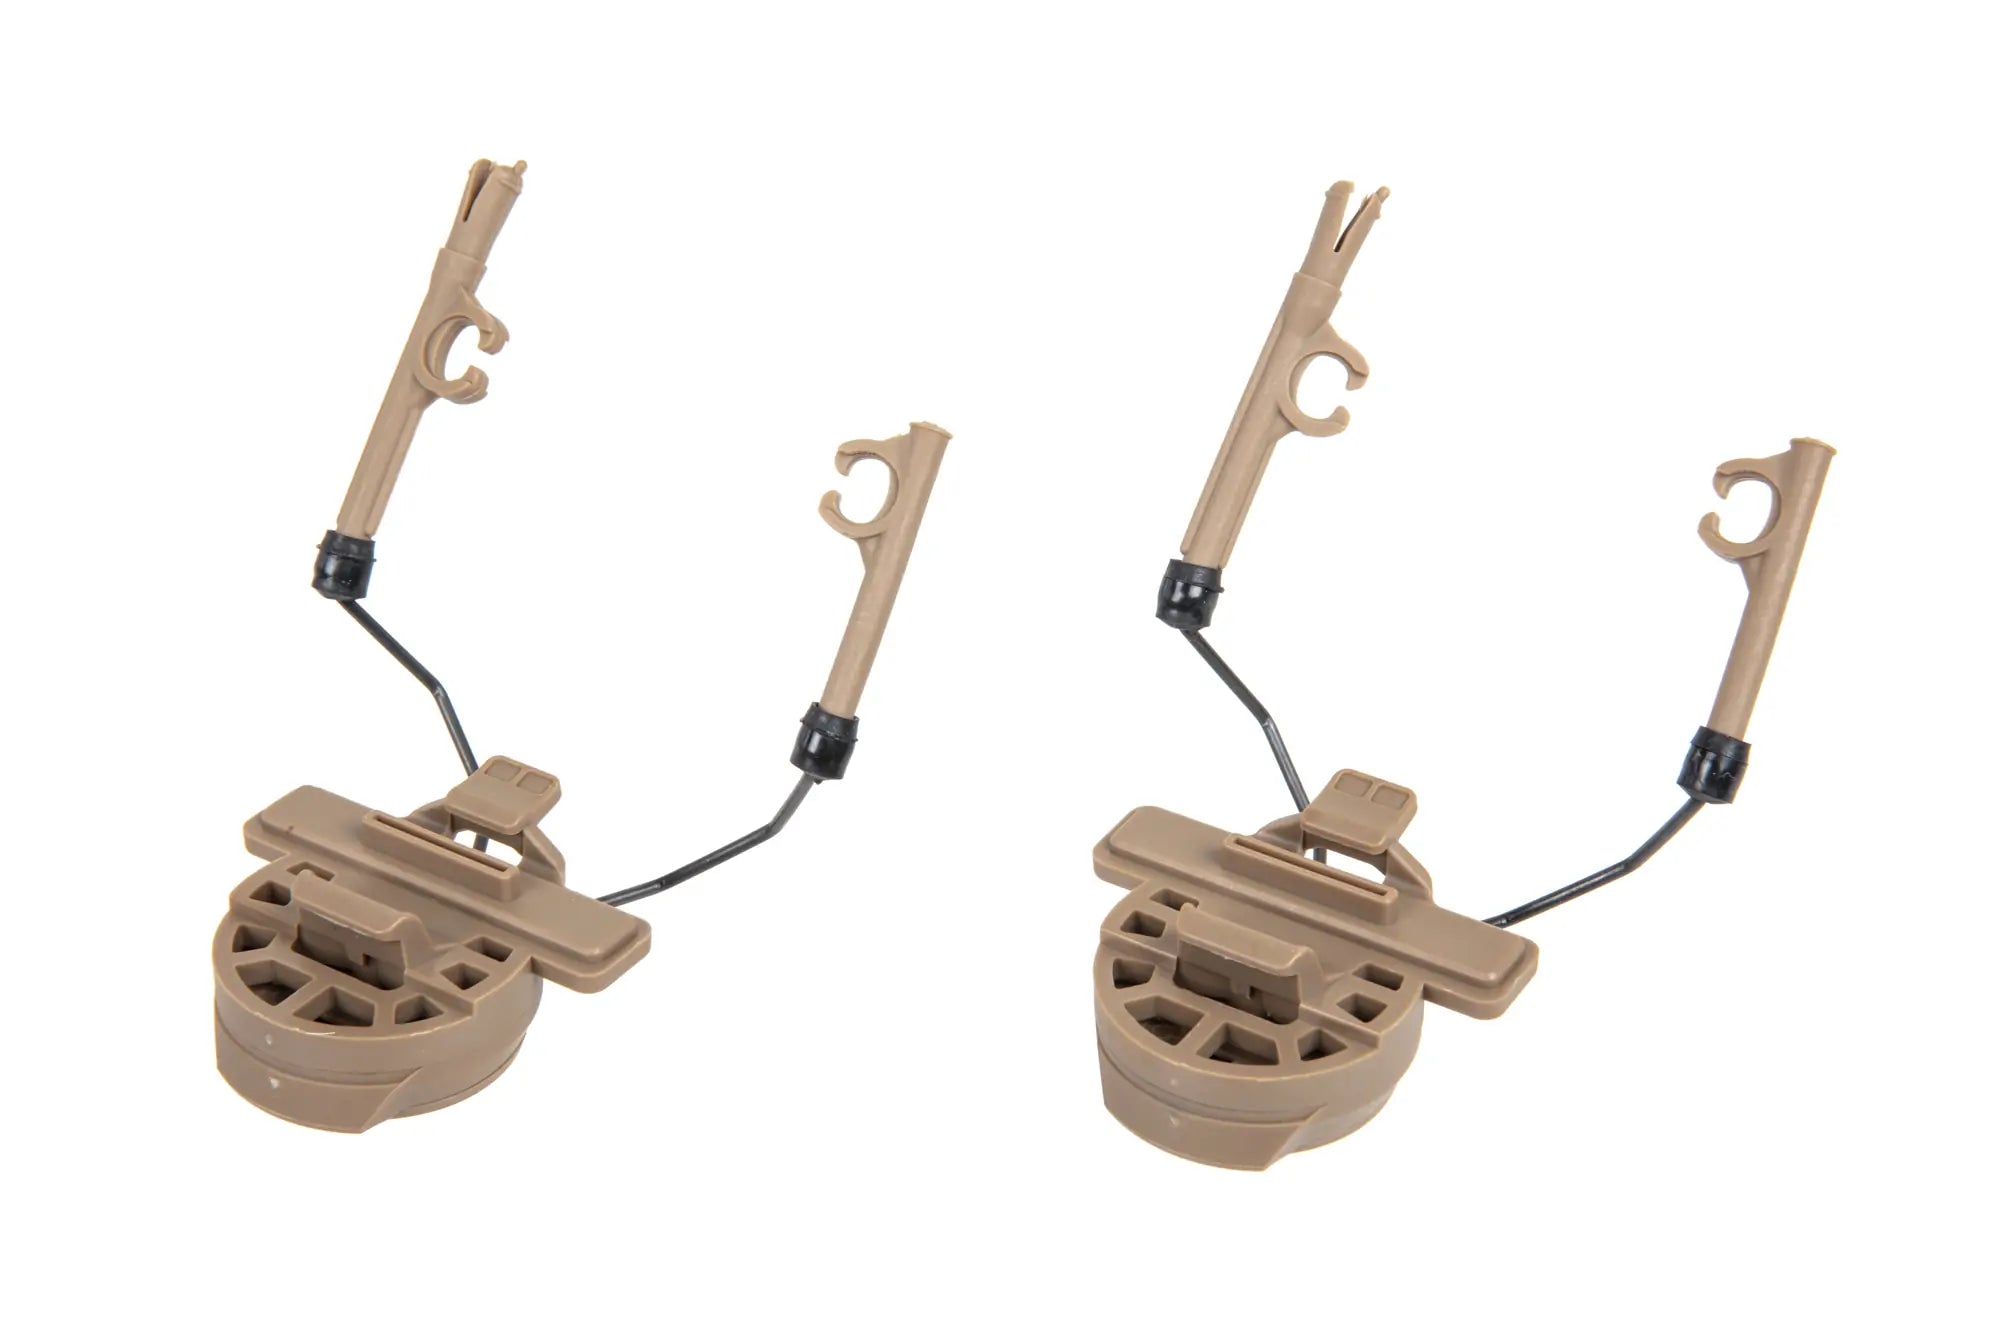 FMA EX 3.0 TW fitting kit for Comtac FDE hearing protection-1